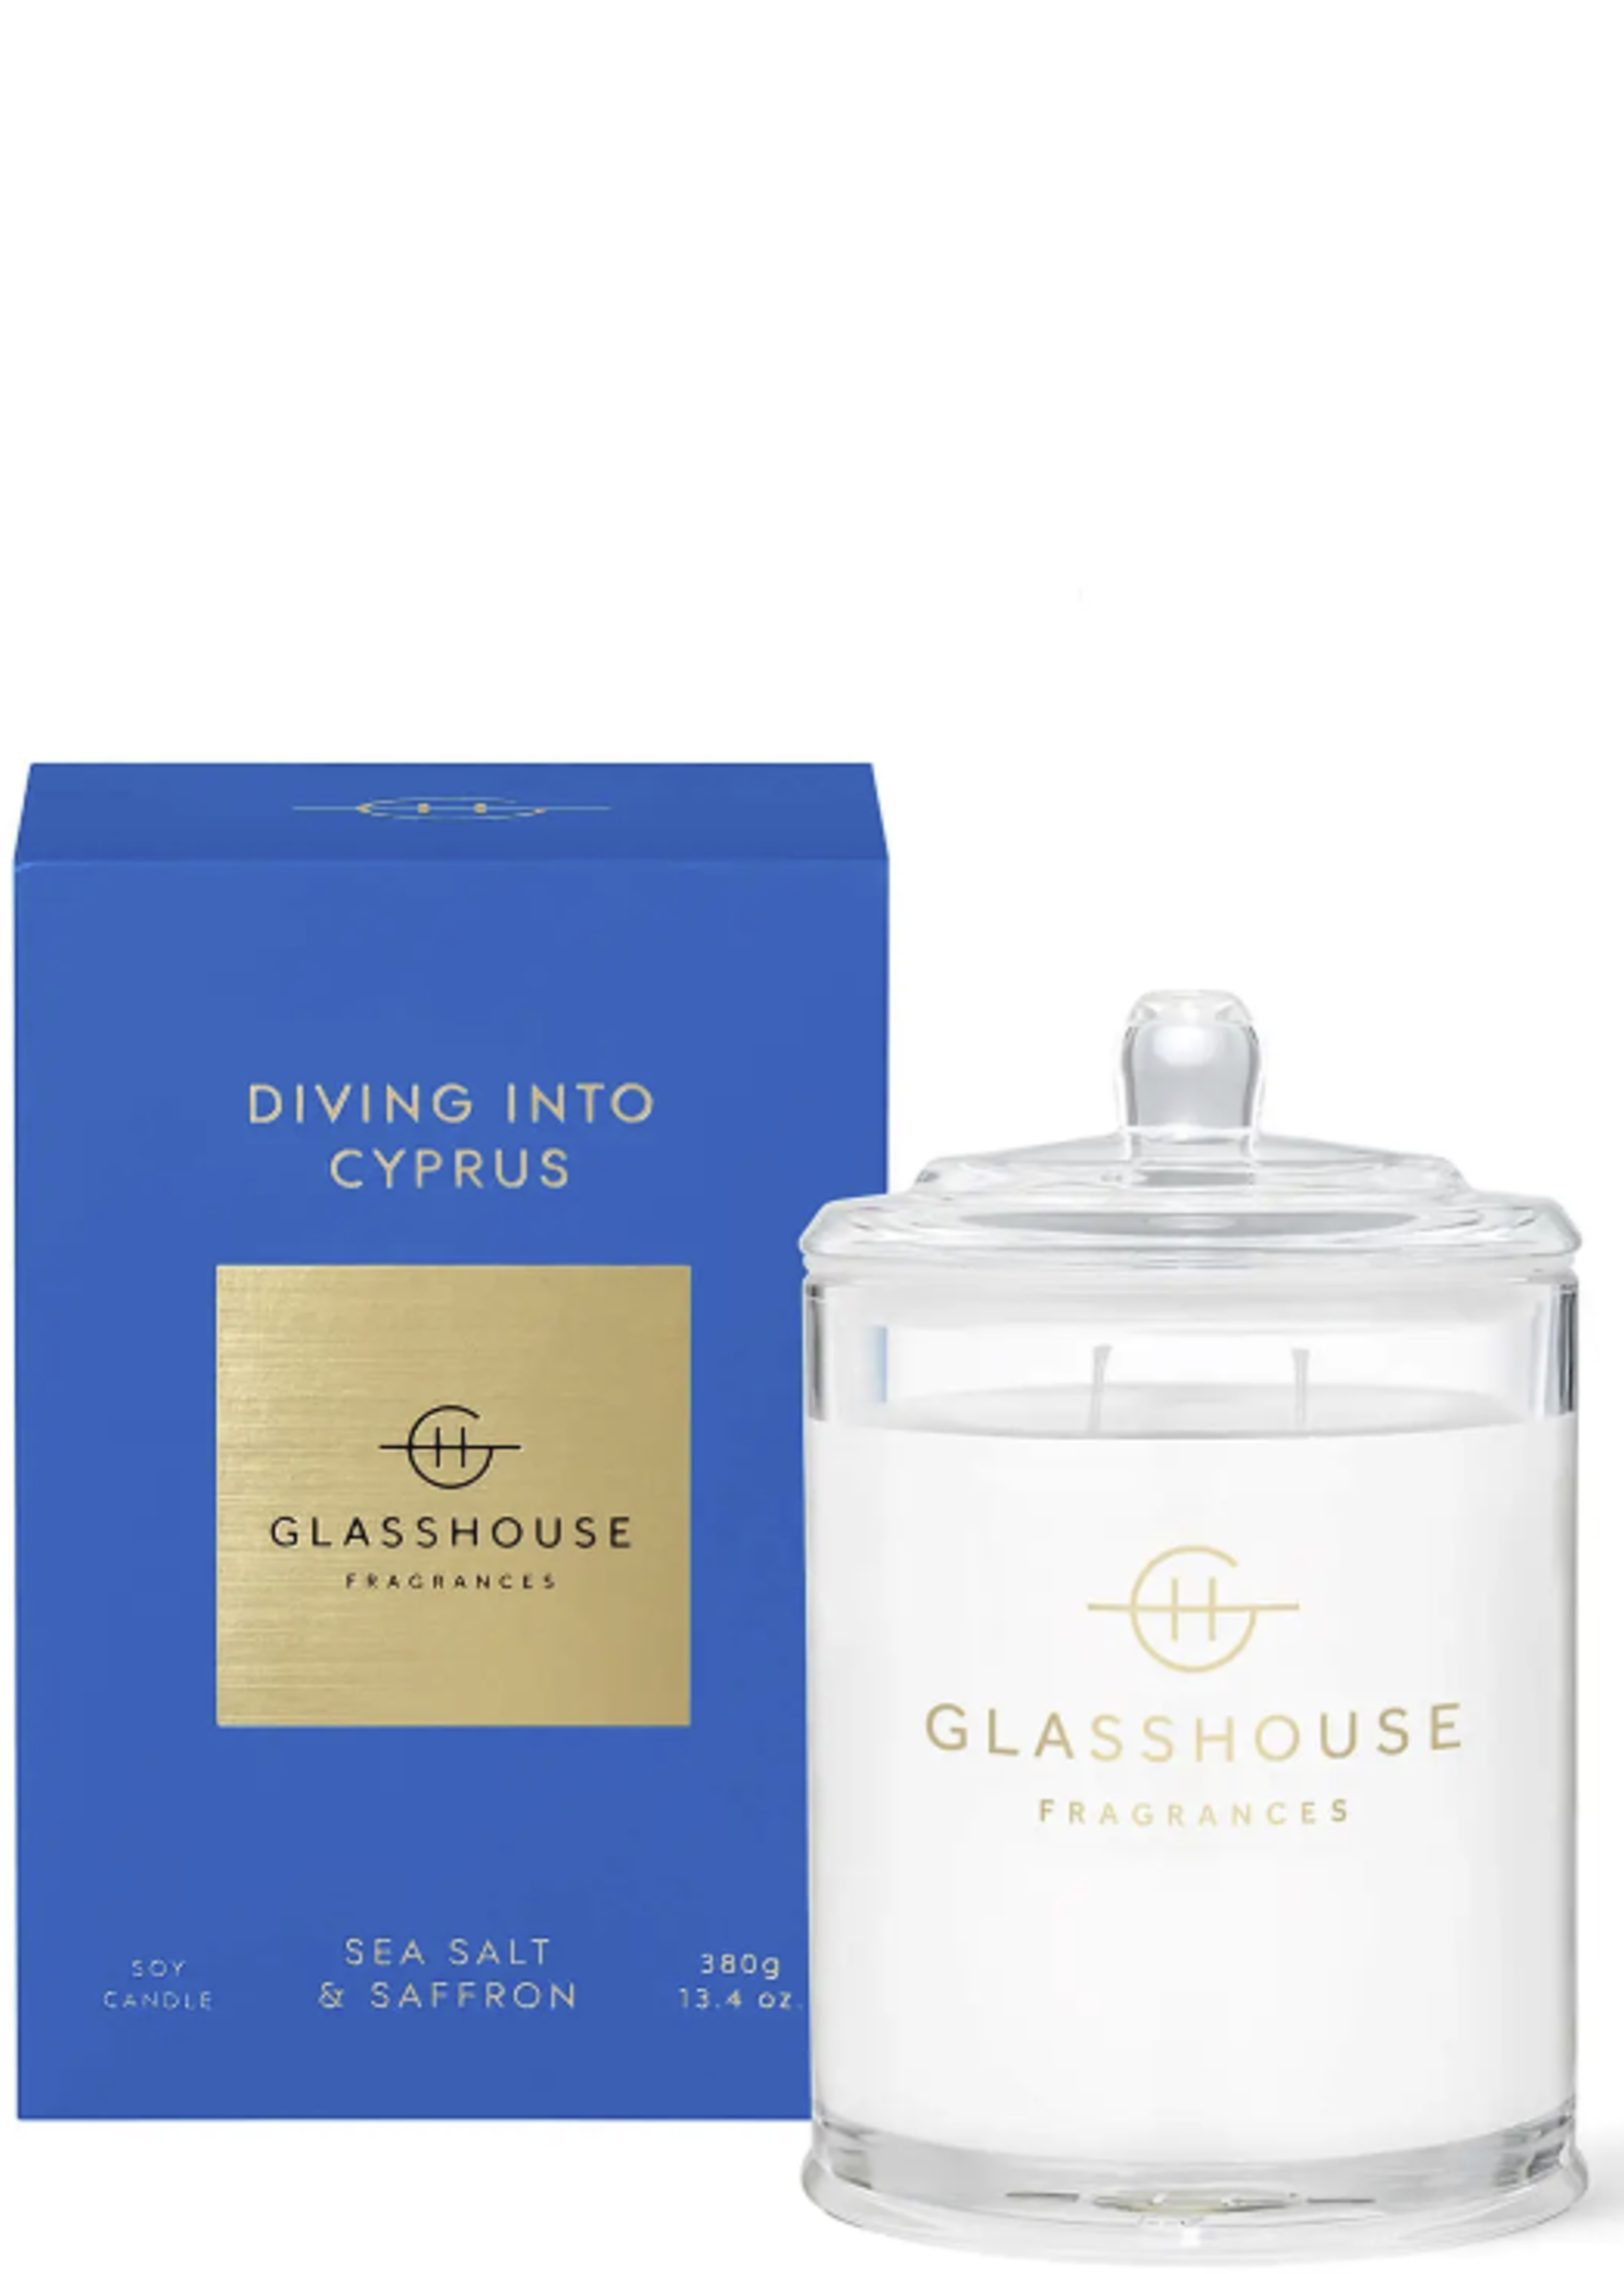 glasshouse 13.4 oz - Diving Into Cyprus